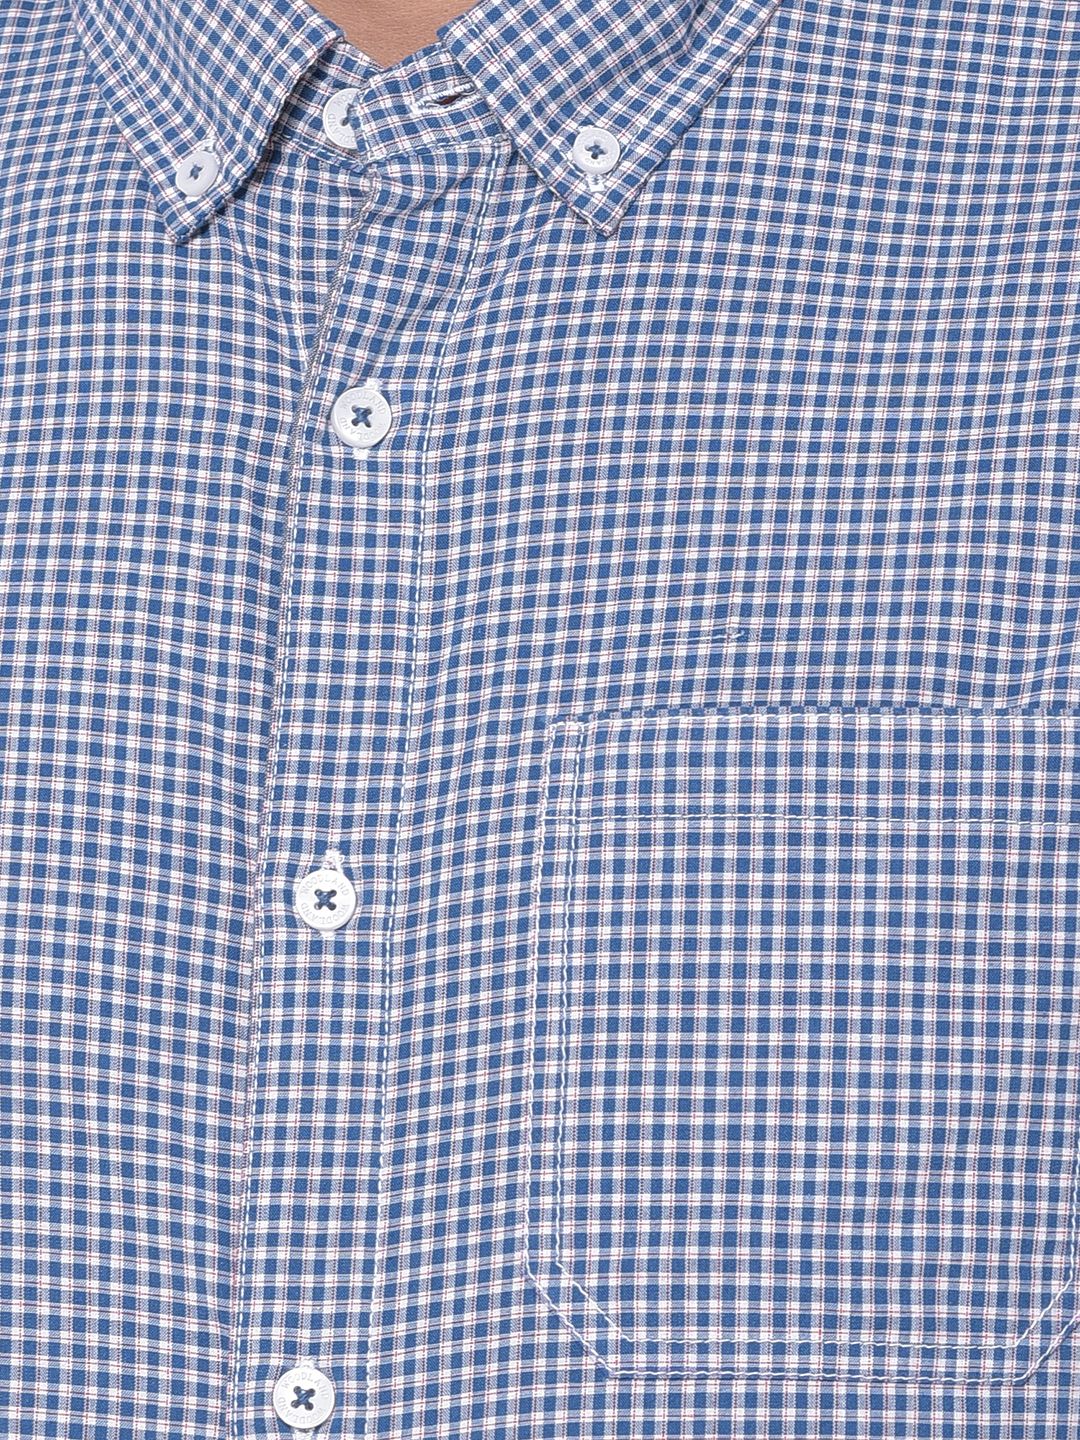 Blue and white check shirt for men